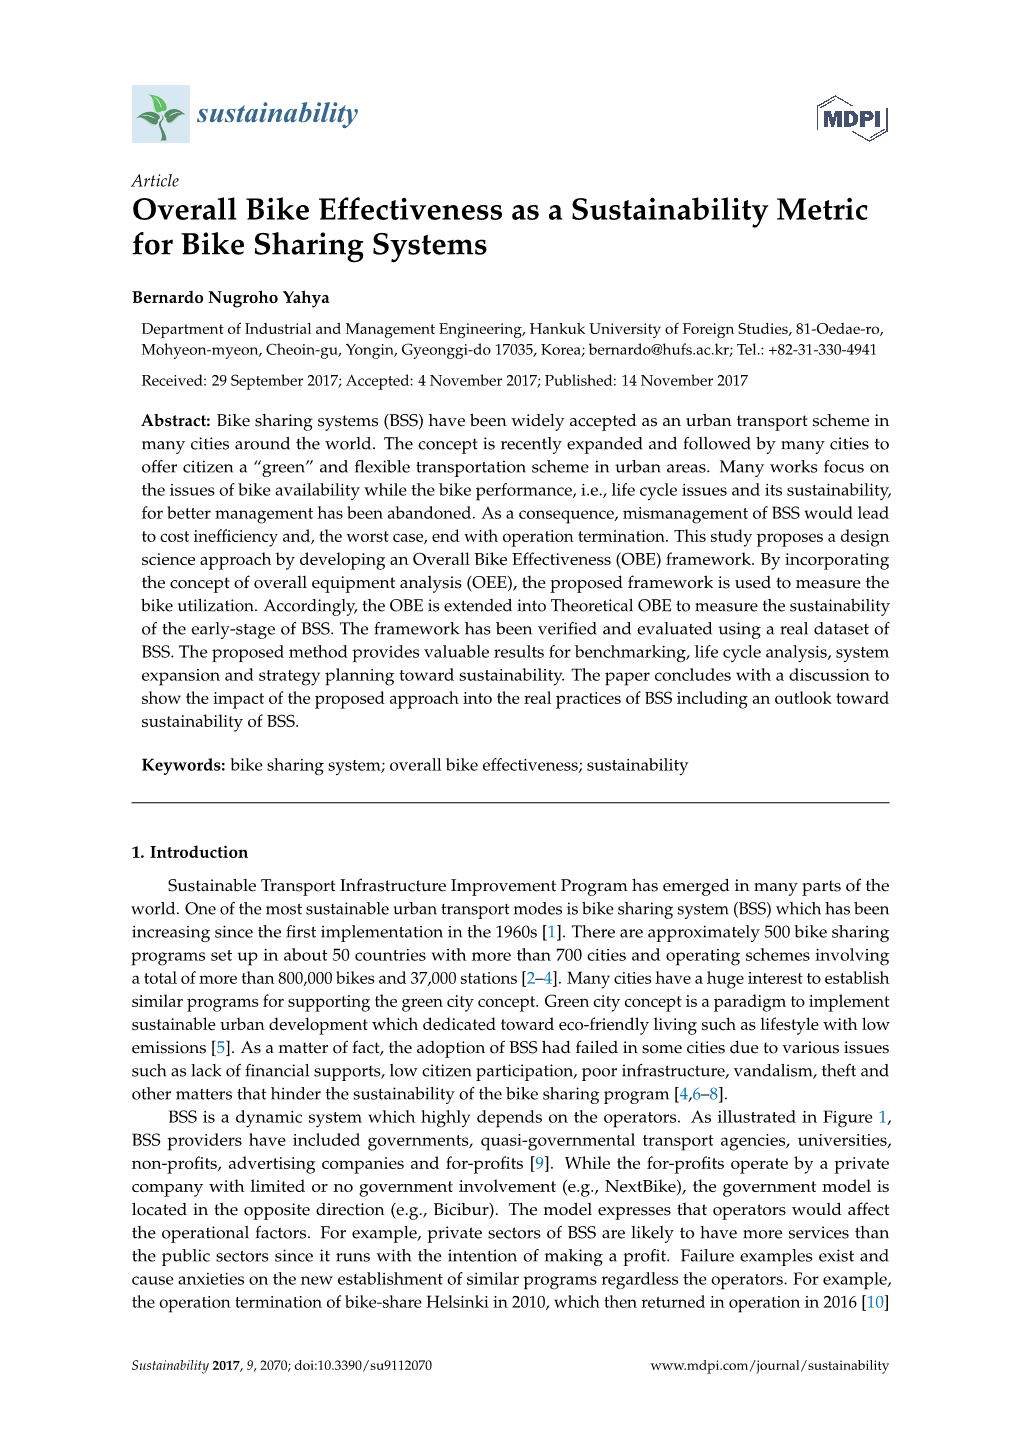 Overall Bike Effectiveness As a Sustainability Metric for Bike Sharing Systems